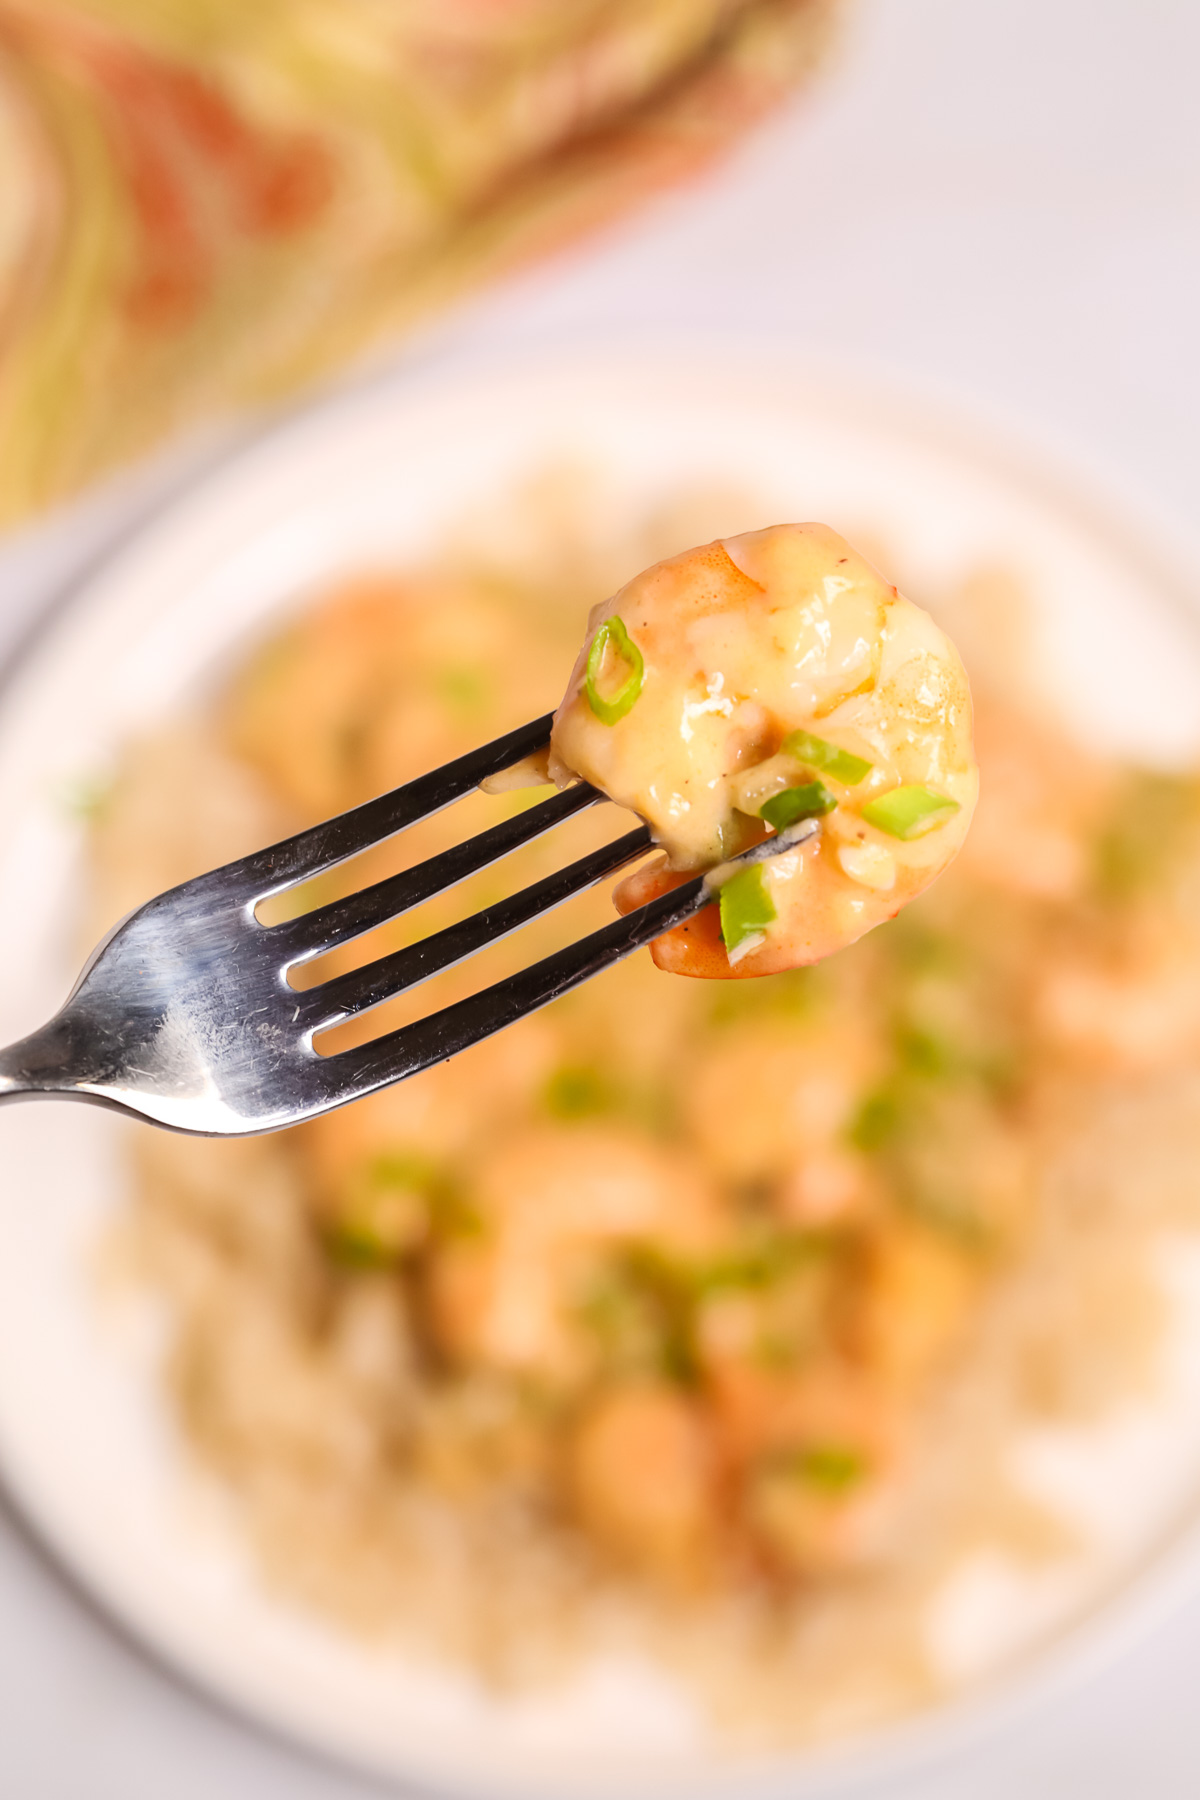 A fork of Creamy Garlic Shrimp and Rice with a dish of Creamy Garlic Shrimp and Rice in background.